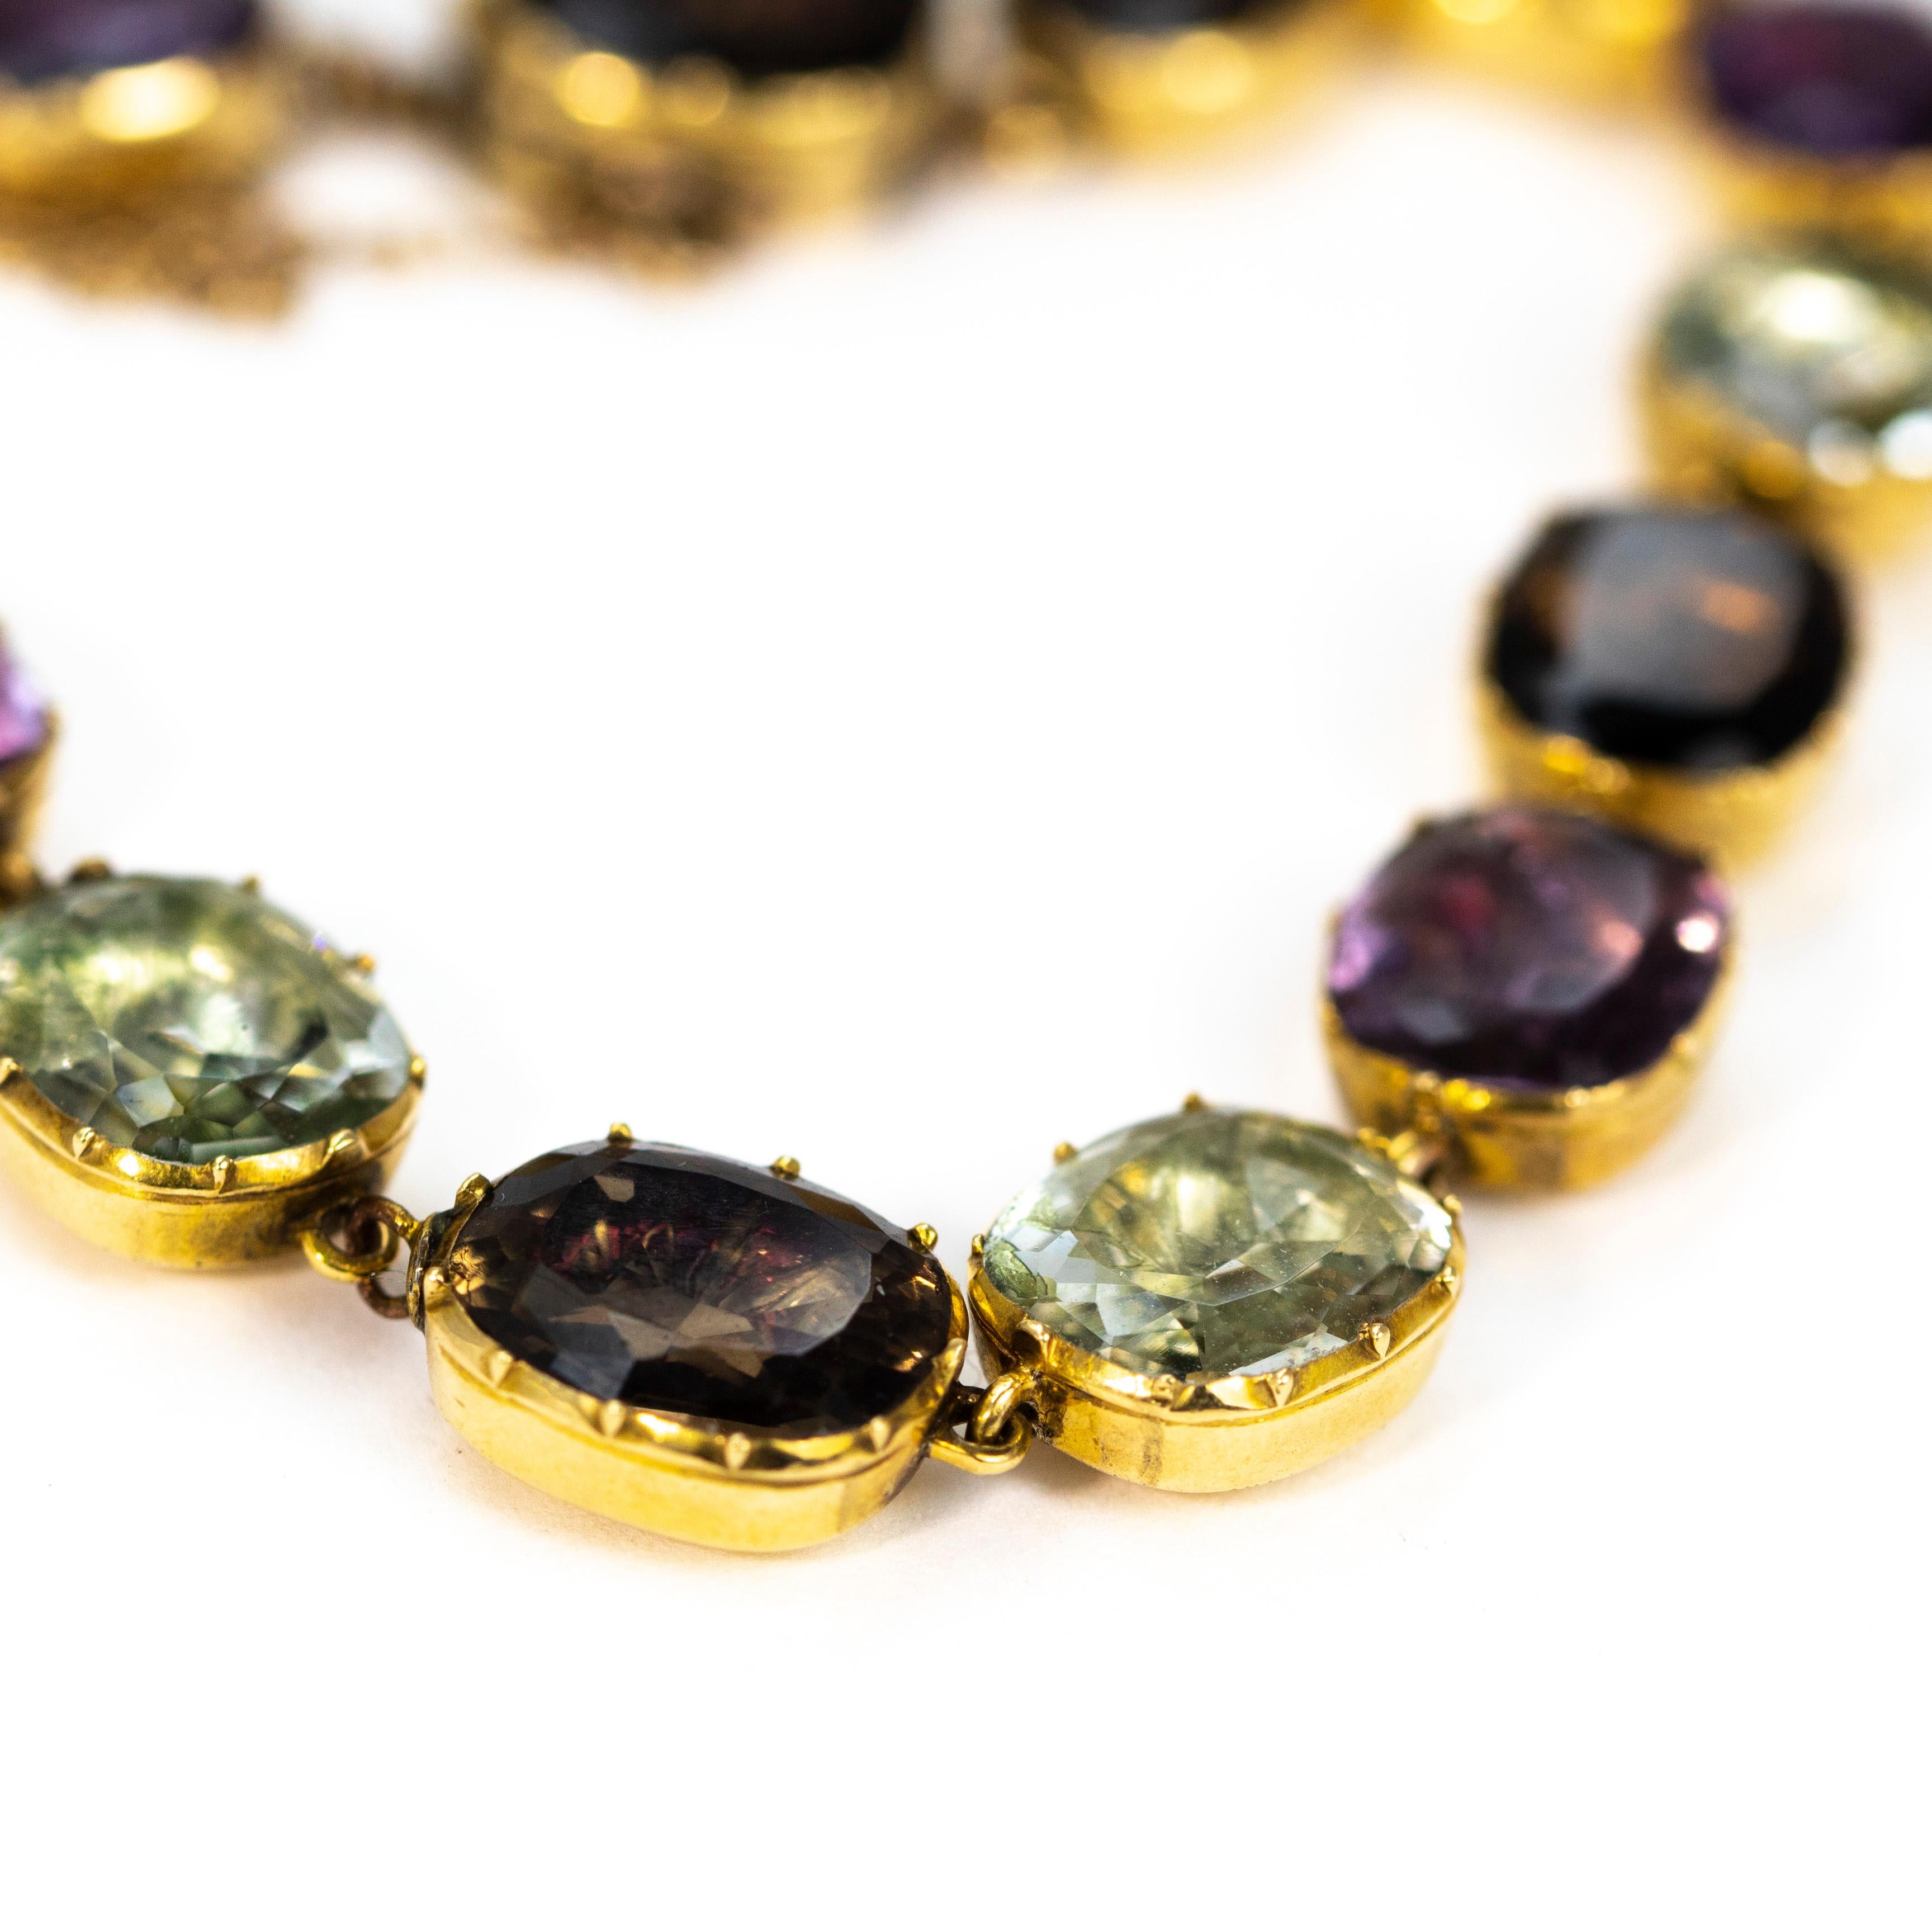 This stunning bracelet holds a gorgeous array of different stones all held in closed back foiled settings which gives wonderful reflection. The edge of the settings feature gold beading and the bracelet is fastened using a very discreet fastening